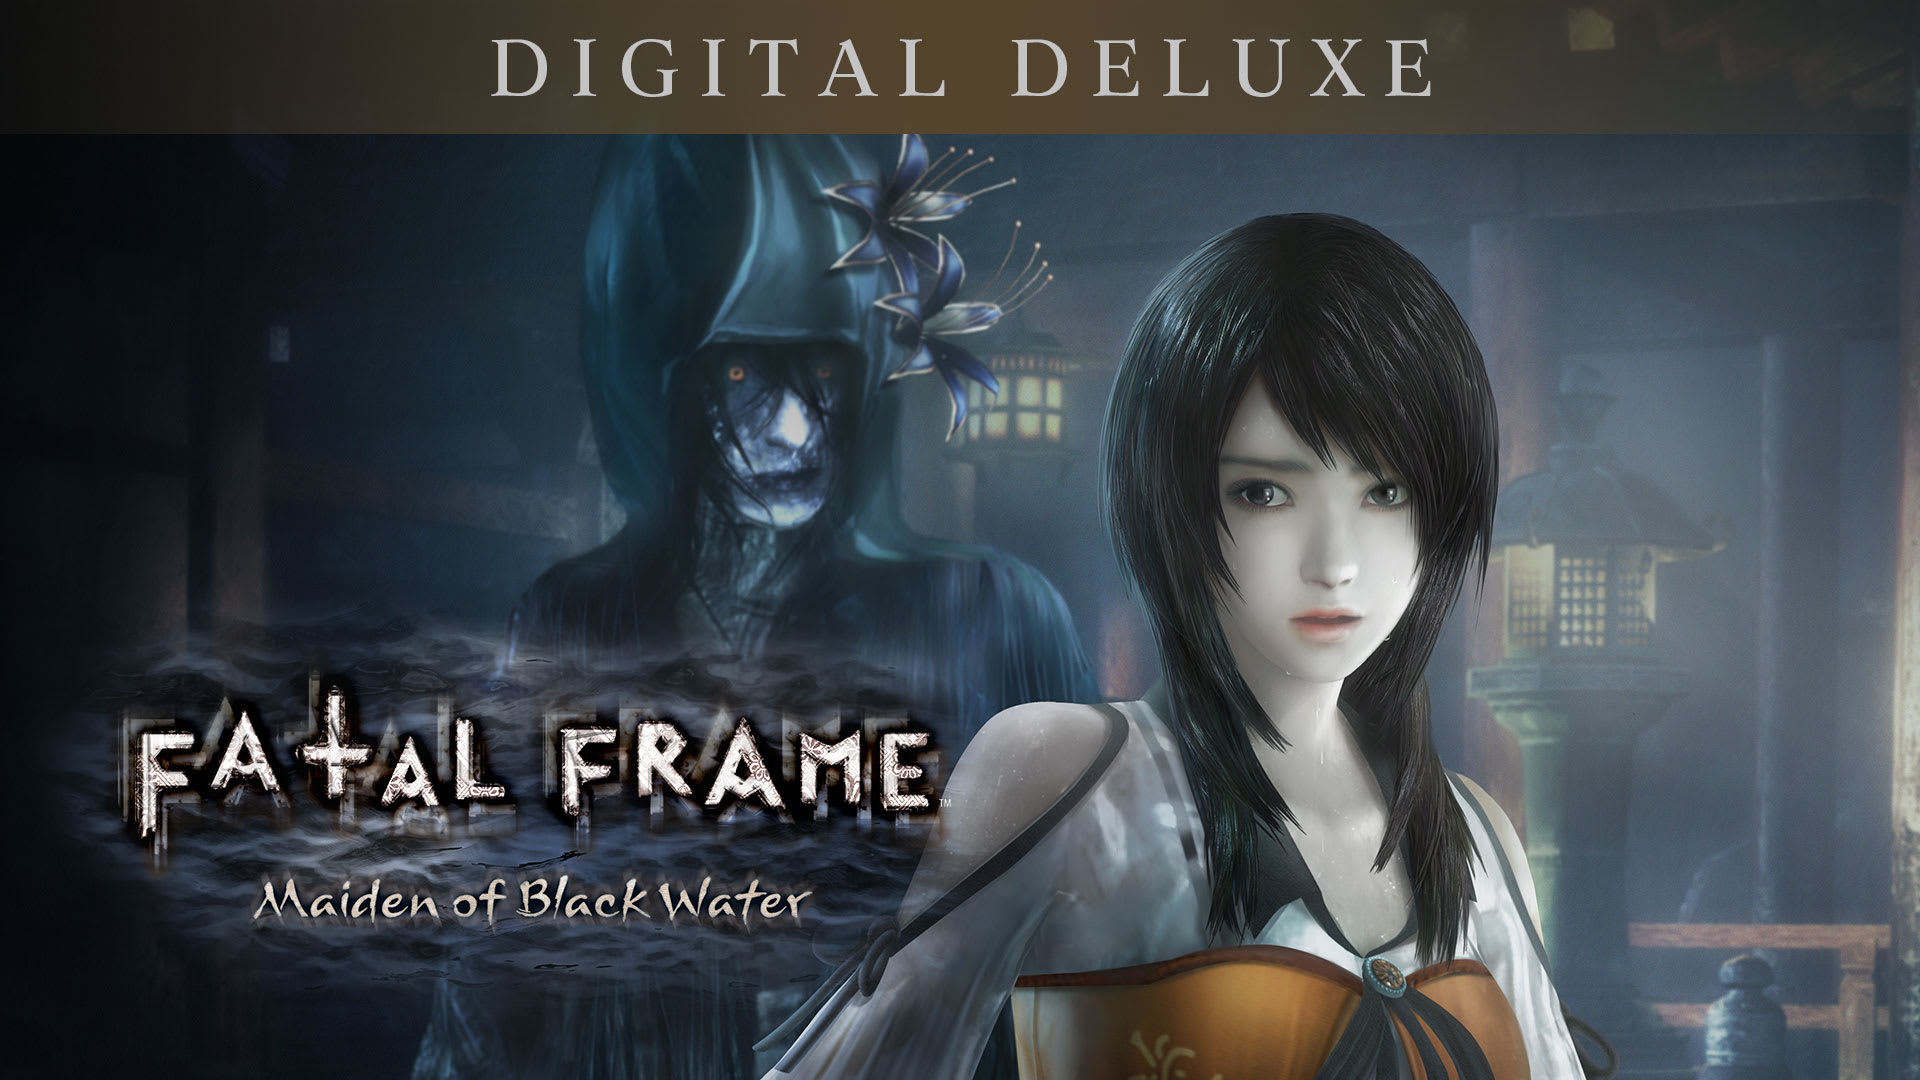 FATAL FRAME: Maiden of Black Water Digital Deluxe Edition 1